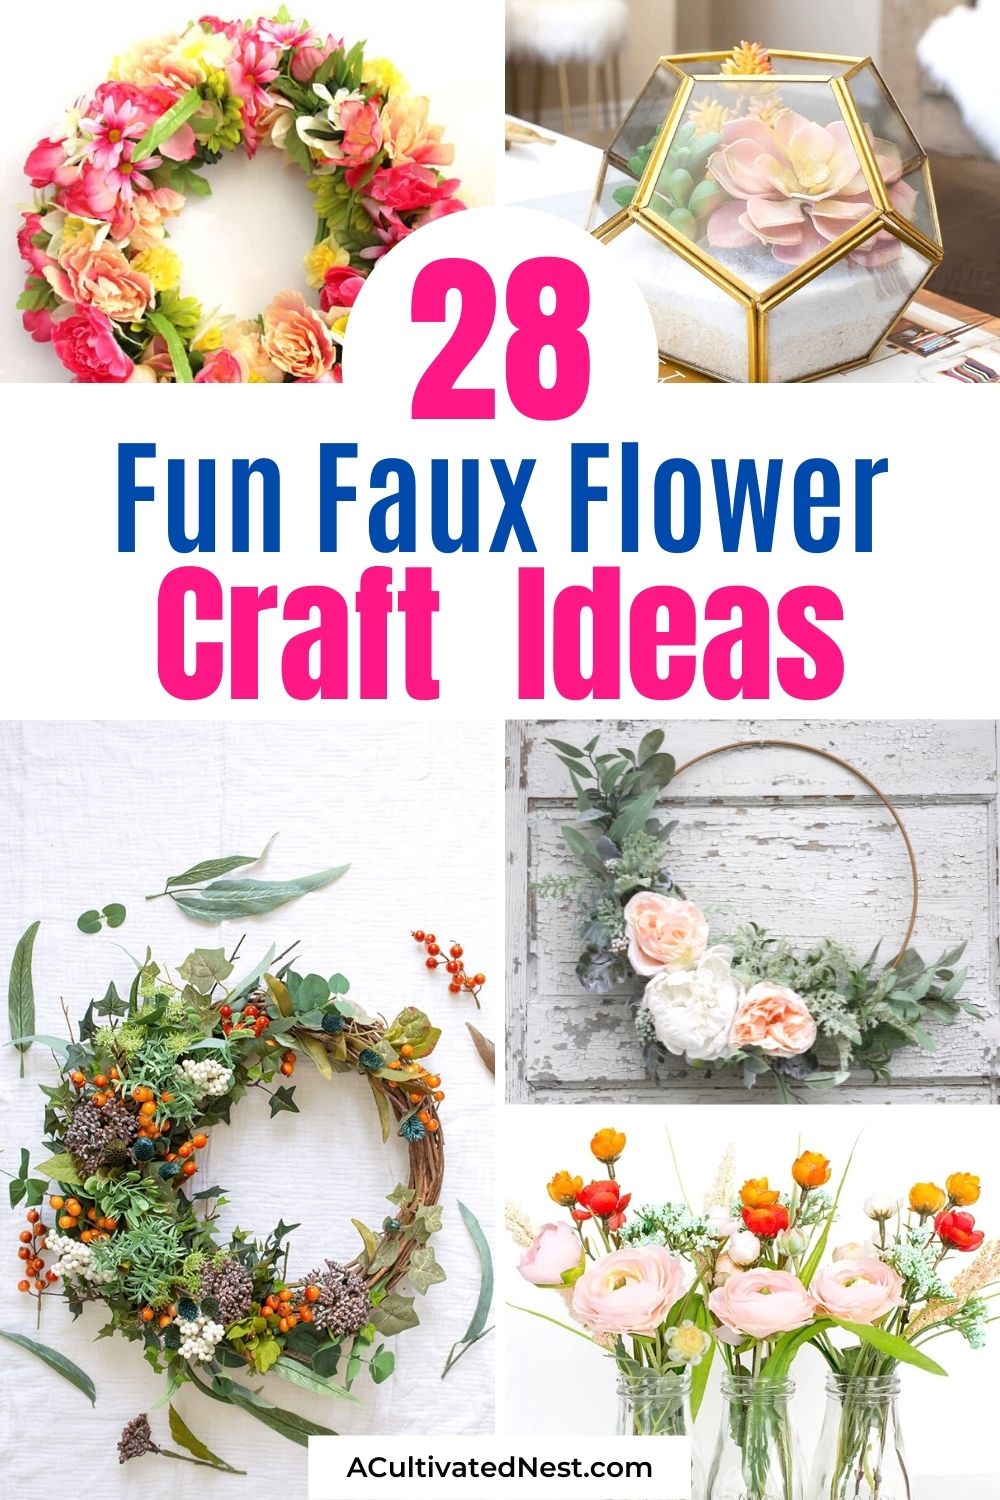 28 Fun Faux Flower Crafts To Make At Home- If you want to add a lovely floral touch to your home that can last indefinitely, then you need to use fake flowers and try some of these fun faux flower crafts! | #fauxFlowerCrafts #fakeFlowers #crafting #craftIdeas #ACultivatedNest